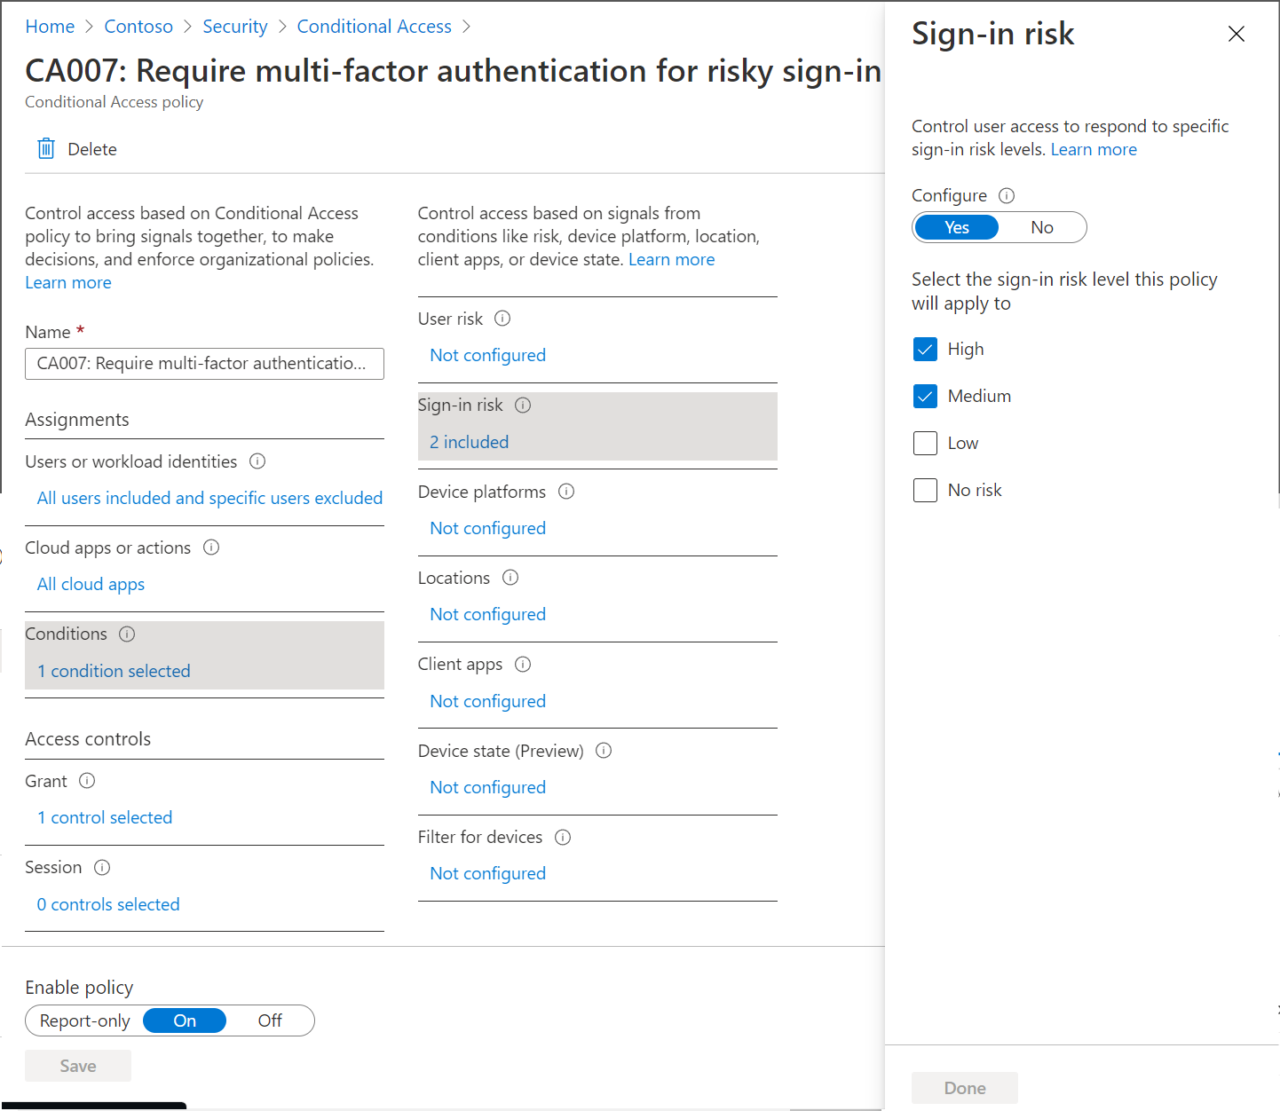 Requirements for MFA Sign-In Based on Medium or High Risk